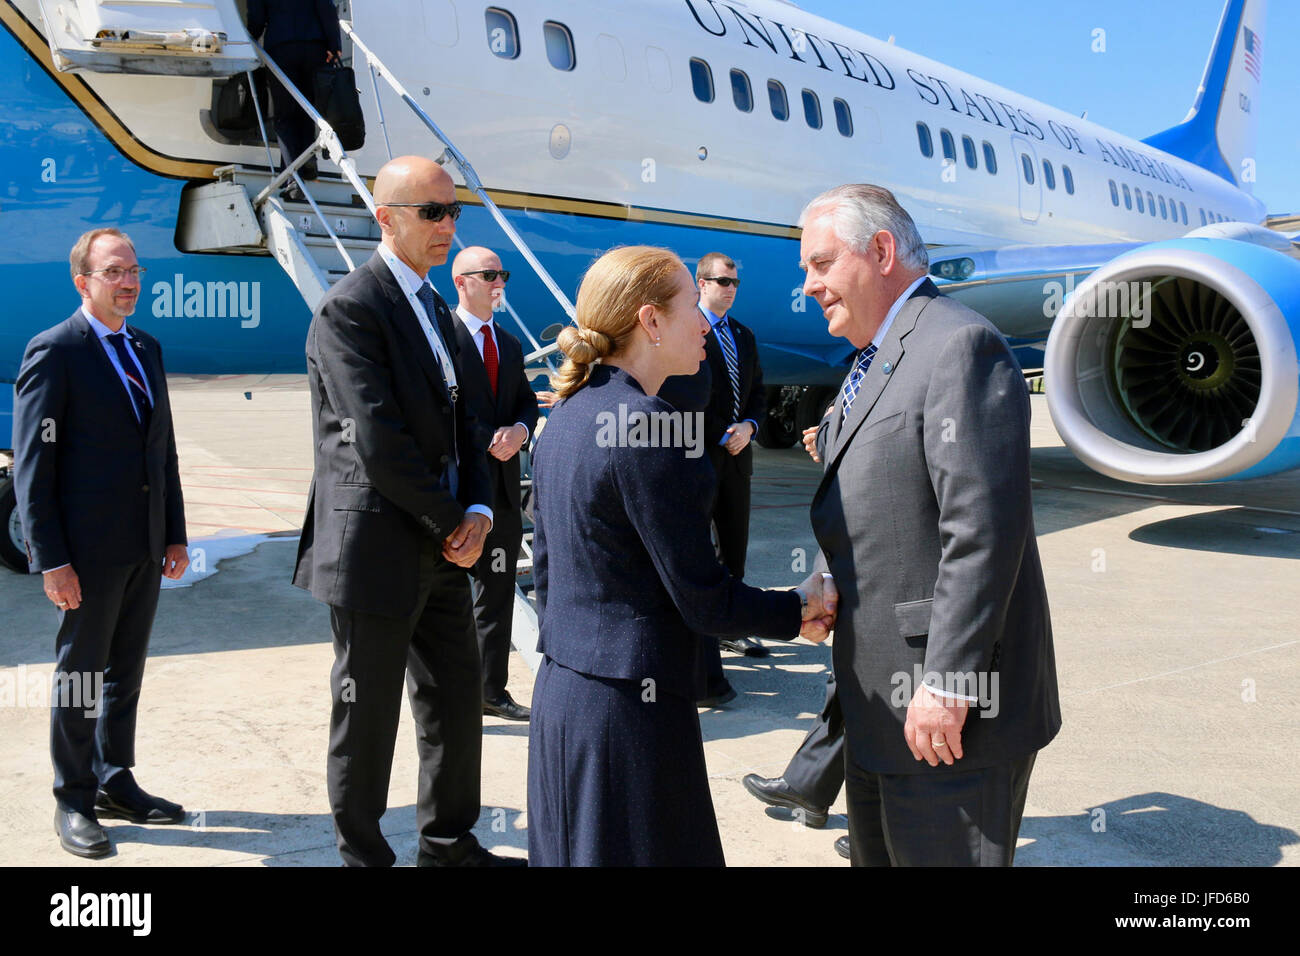 U.S. Secretary of State Rex Tillerson shakes hands with Kelly Degnan, Chargé d’Affaires ad interim of the U.S. Embassy in Rome, Italy, before departing Pisa Military Airport en route to Moscow, Russia, on April 11, 2017. Stock Photo